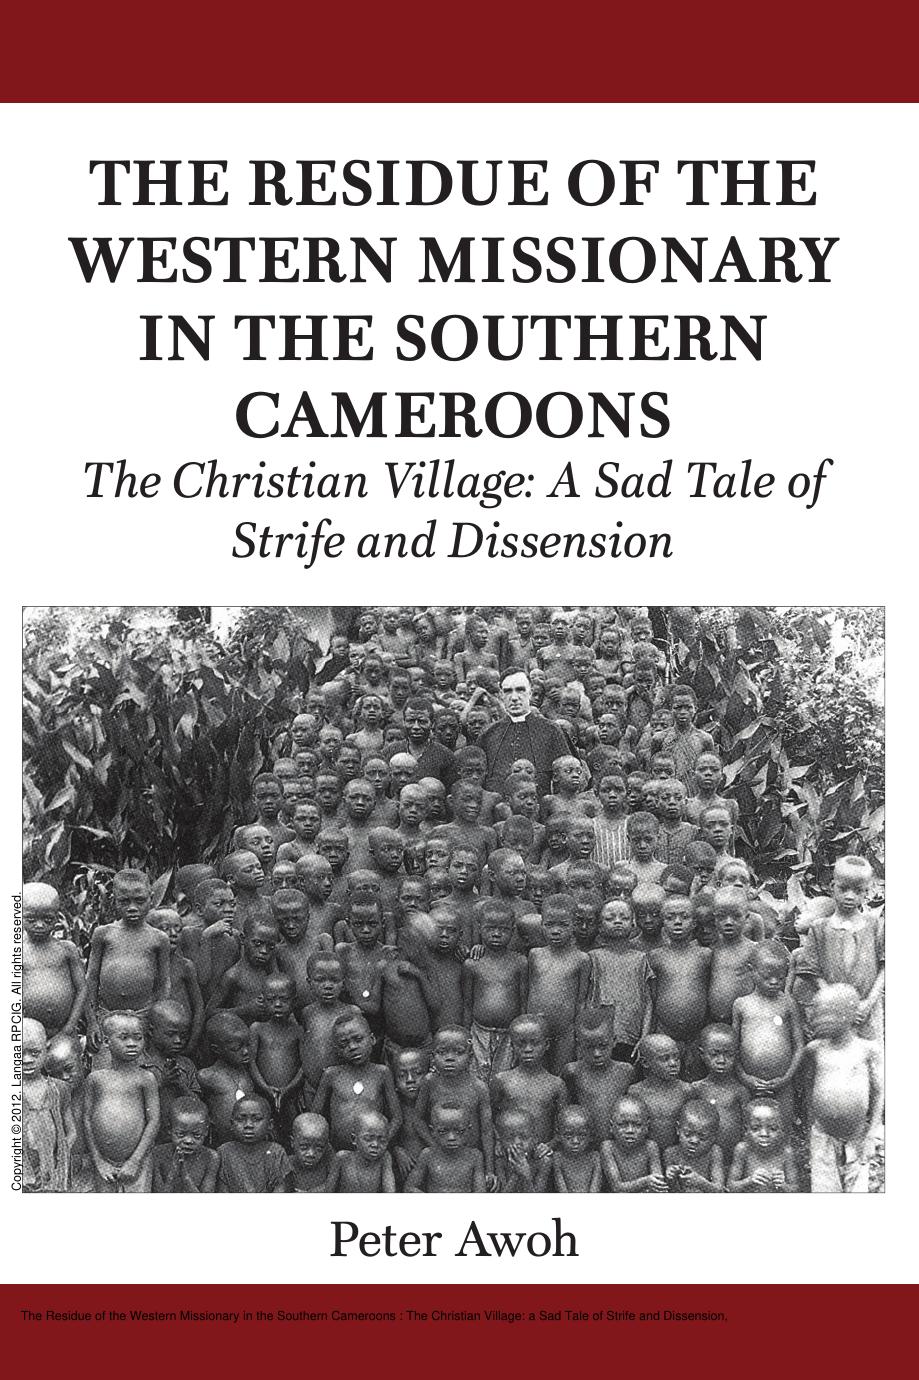 The Residue of the Western Missionary in the Southern Cameroons : The Christian Village: a Sad Tale of Strife and Dissension by Peter Awoh